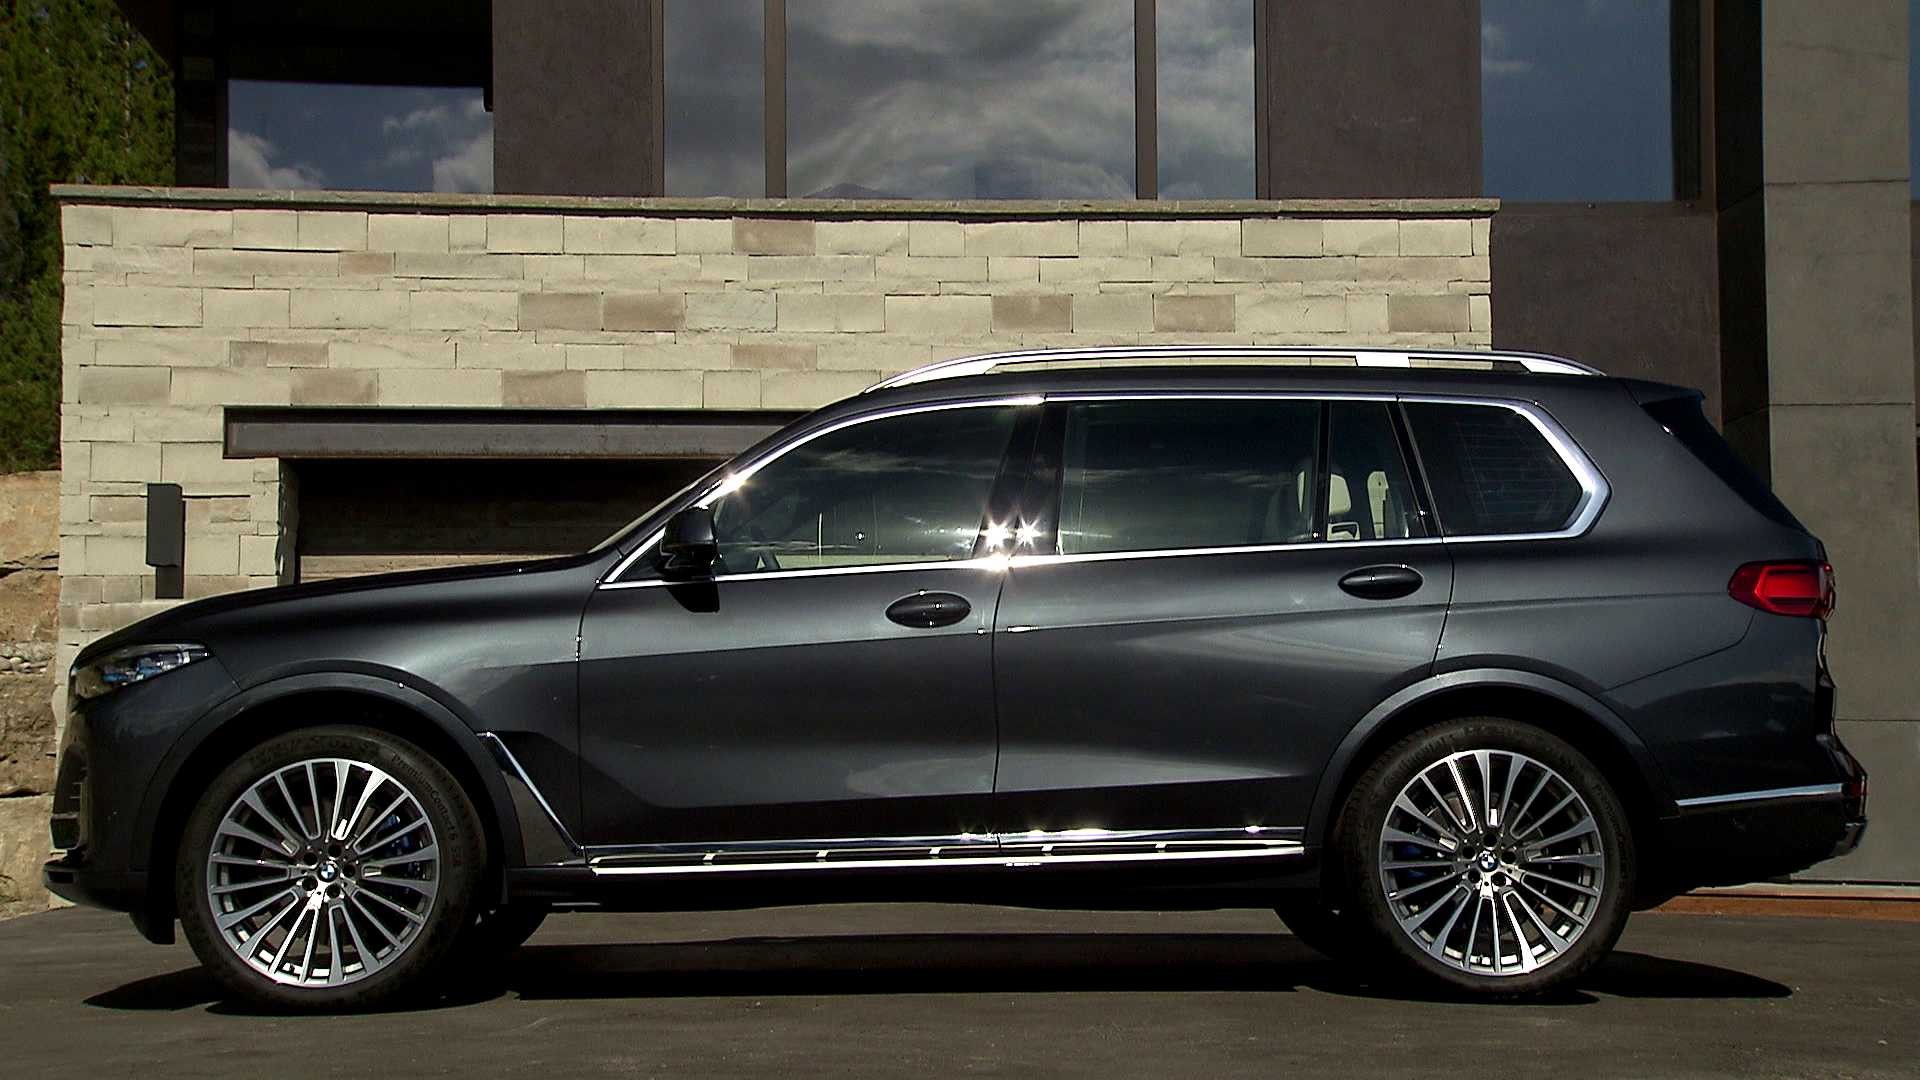 The first-ever BMW X7